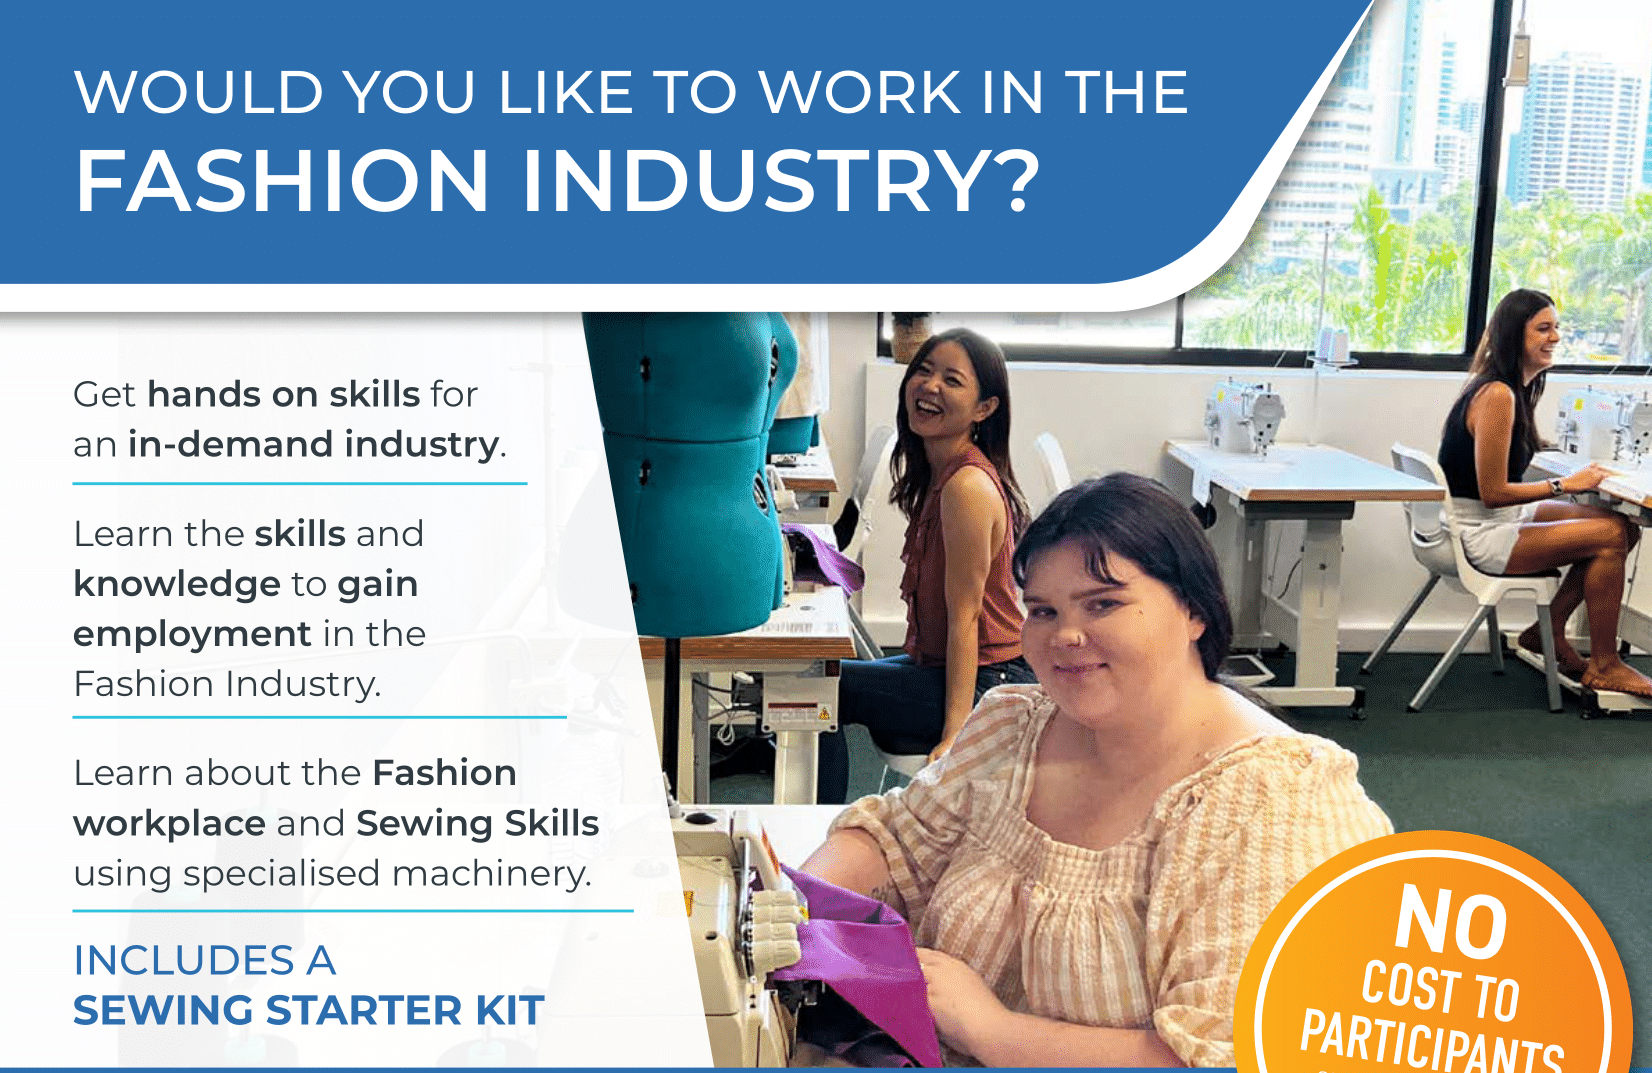 Would you like to work in the Fashion Industry?